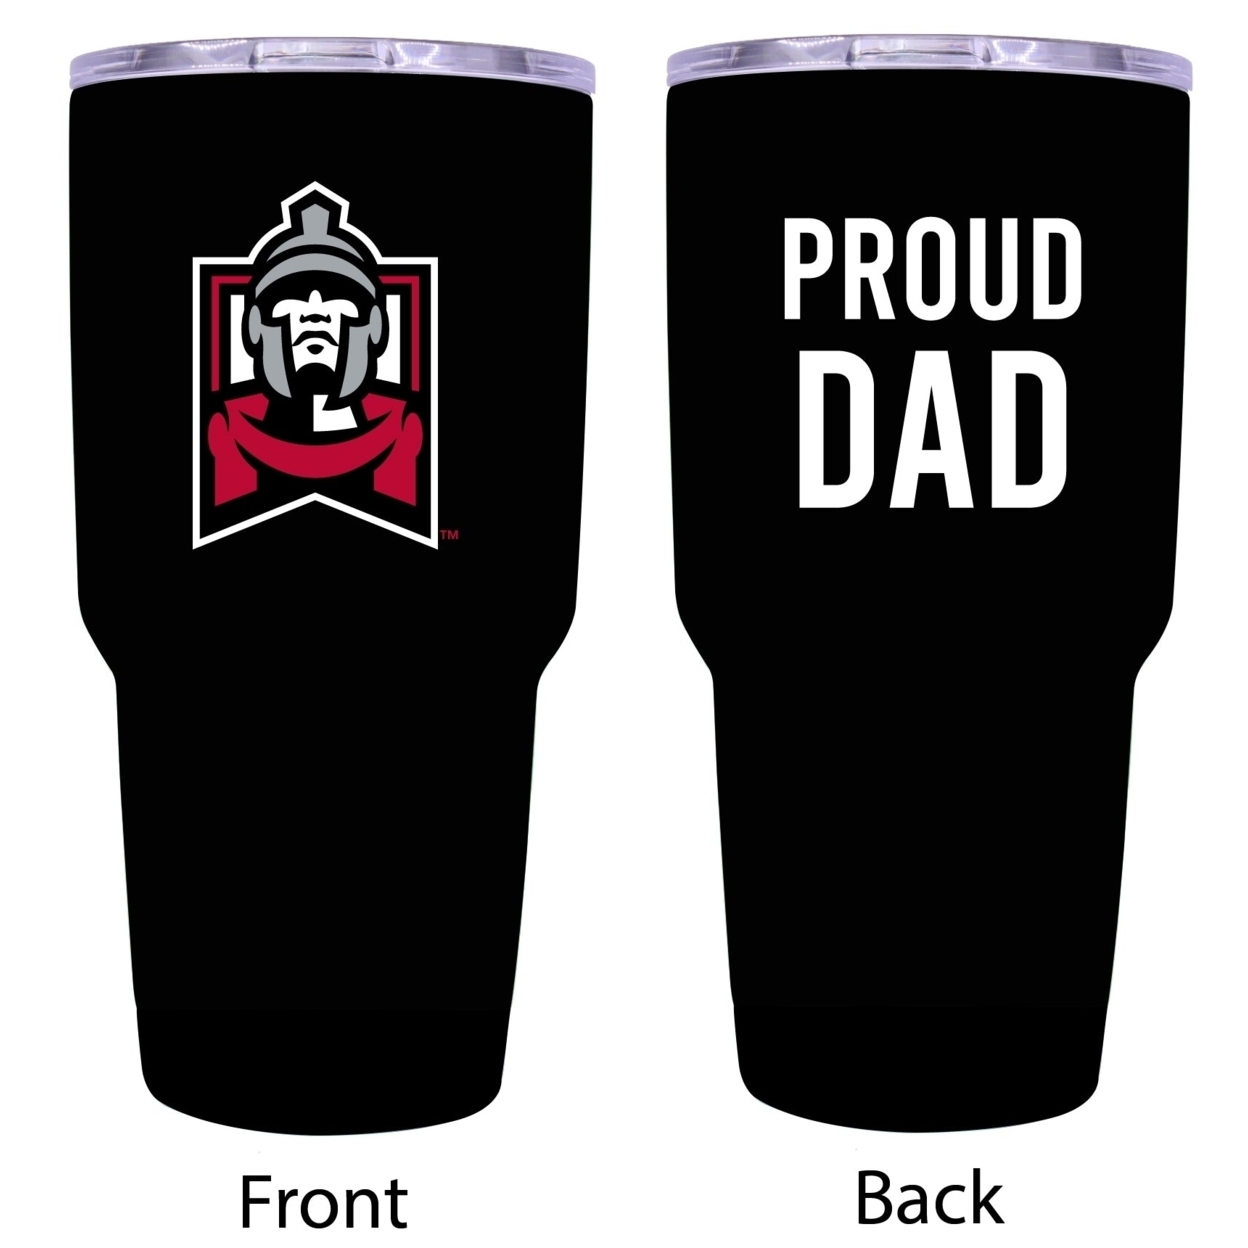 East Stroudsburg University Proud Dad 24oz Insulated Stainless Steel Tumbler